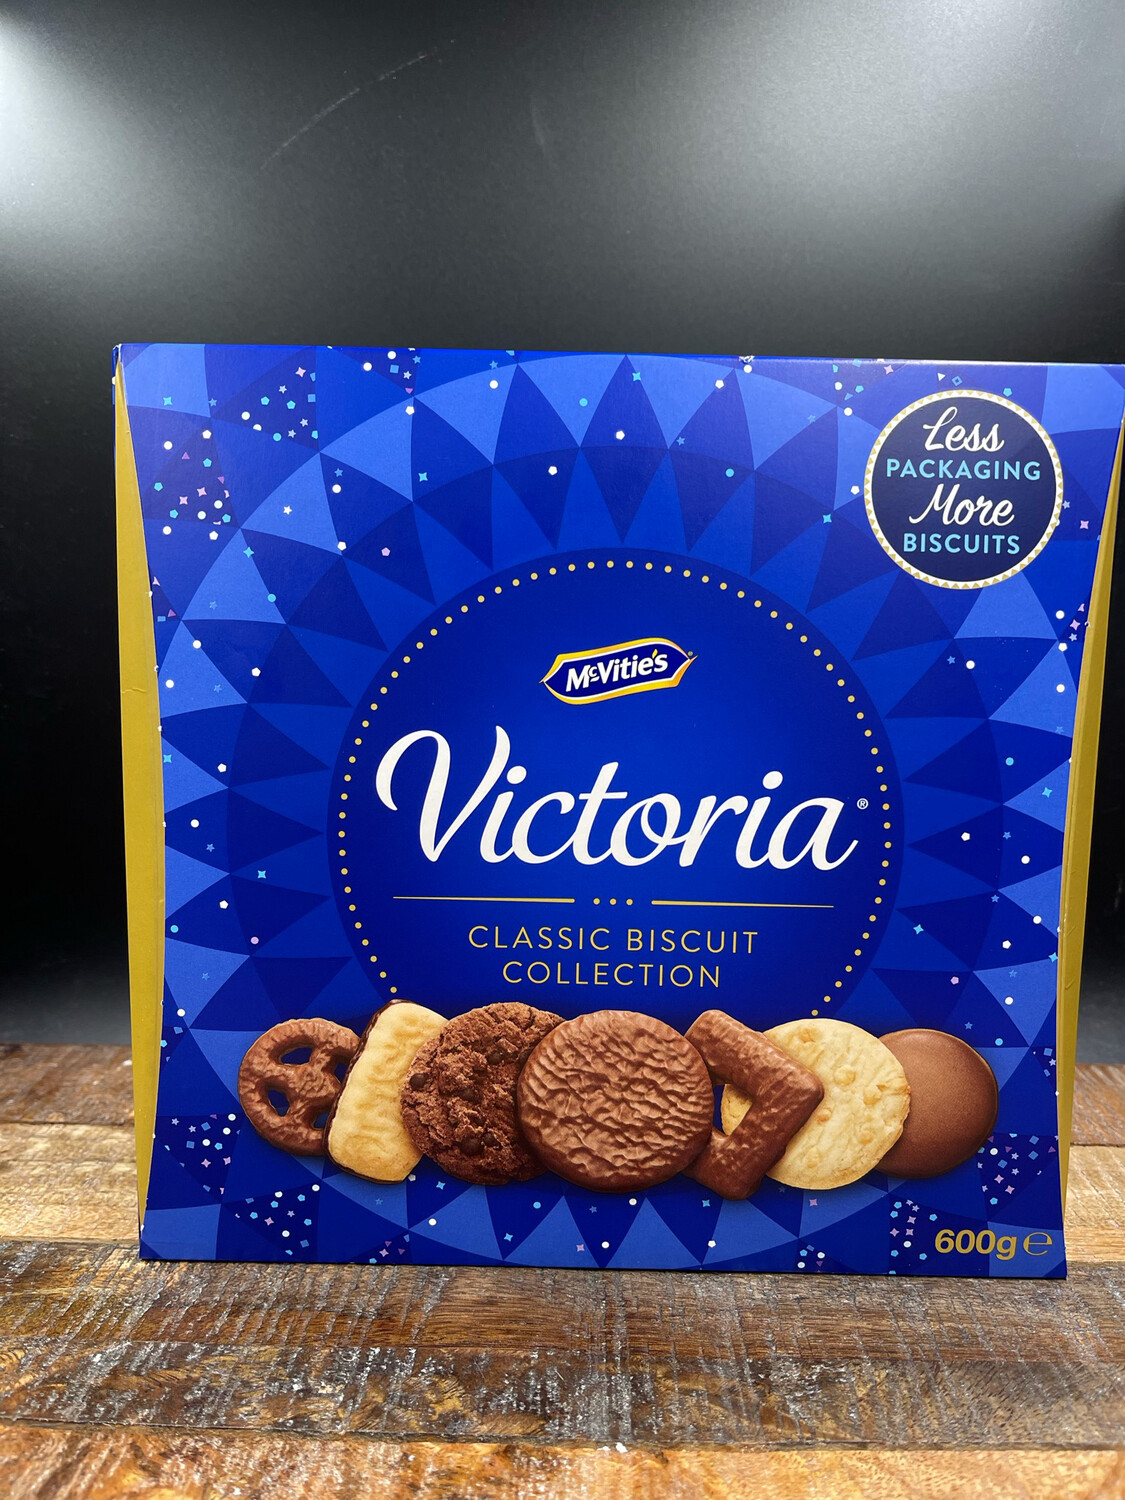 McVities Victoria Classic Biscuit Collection 600g